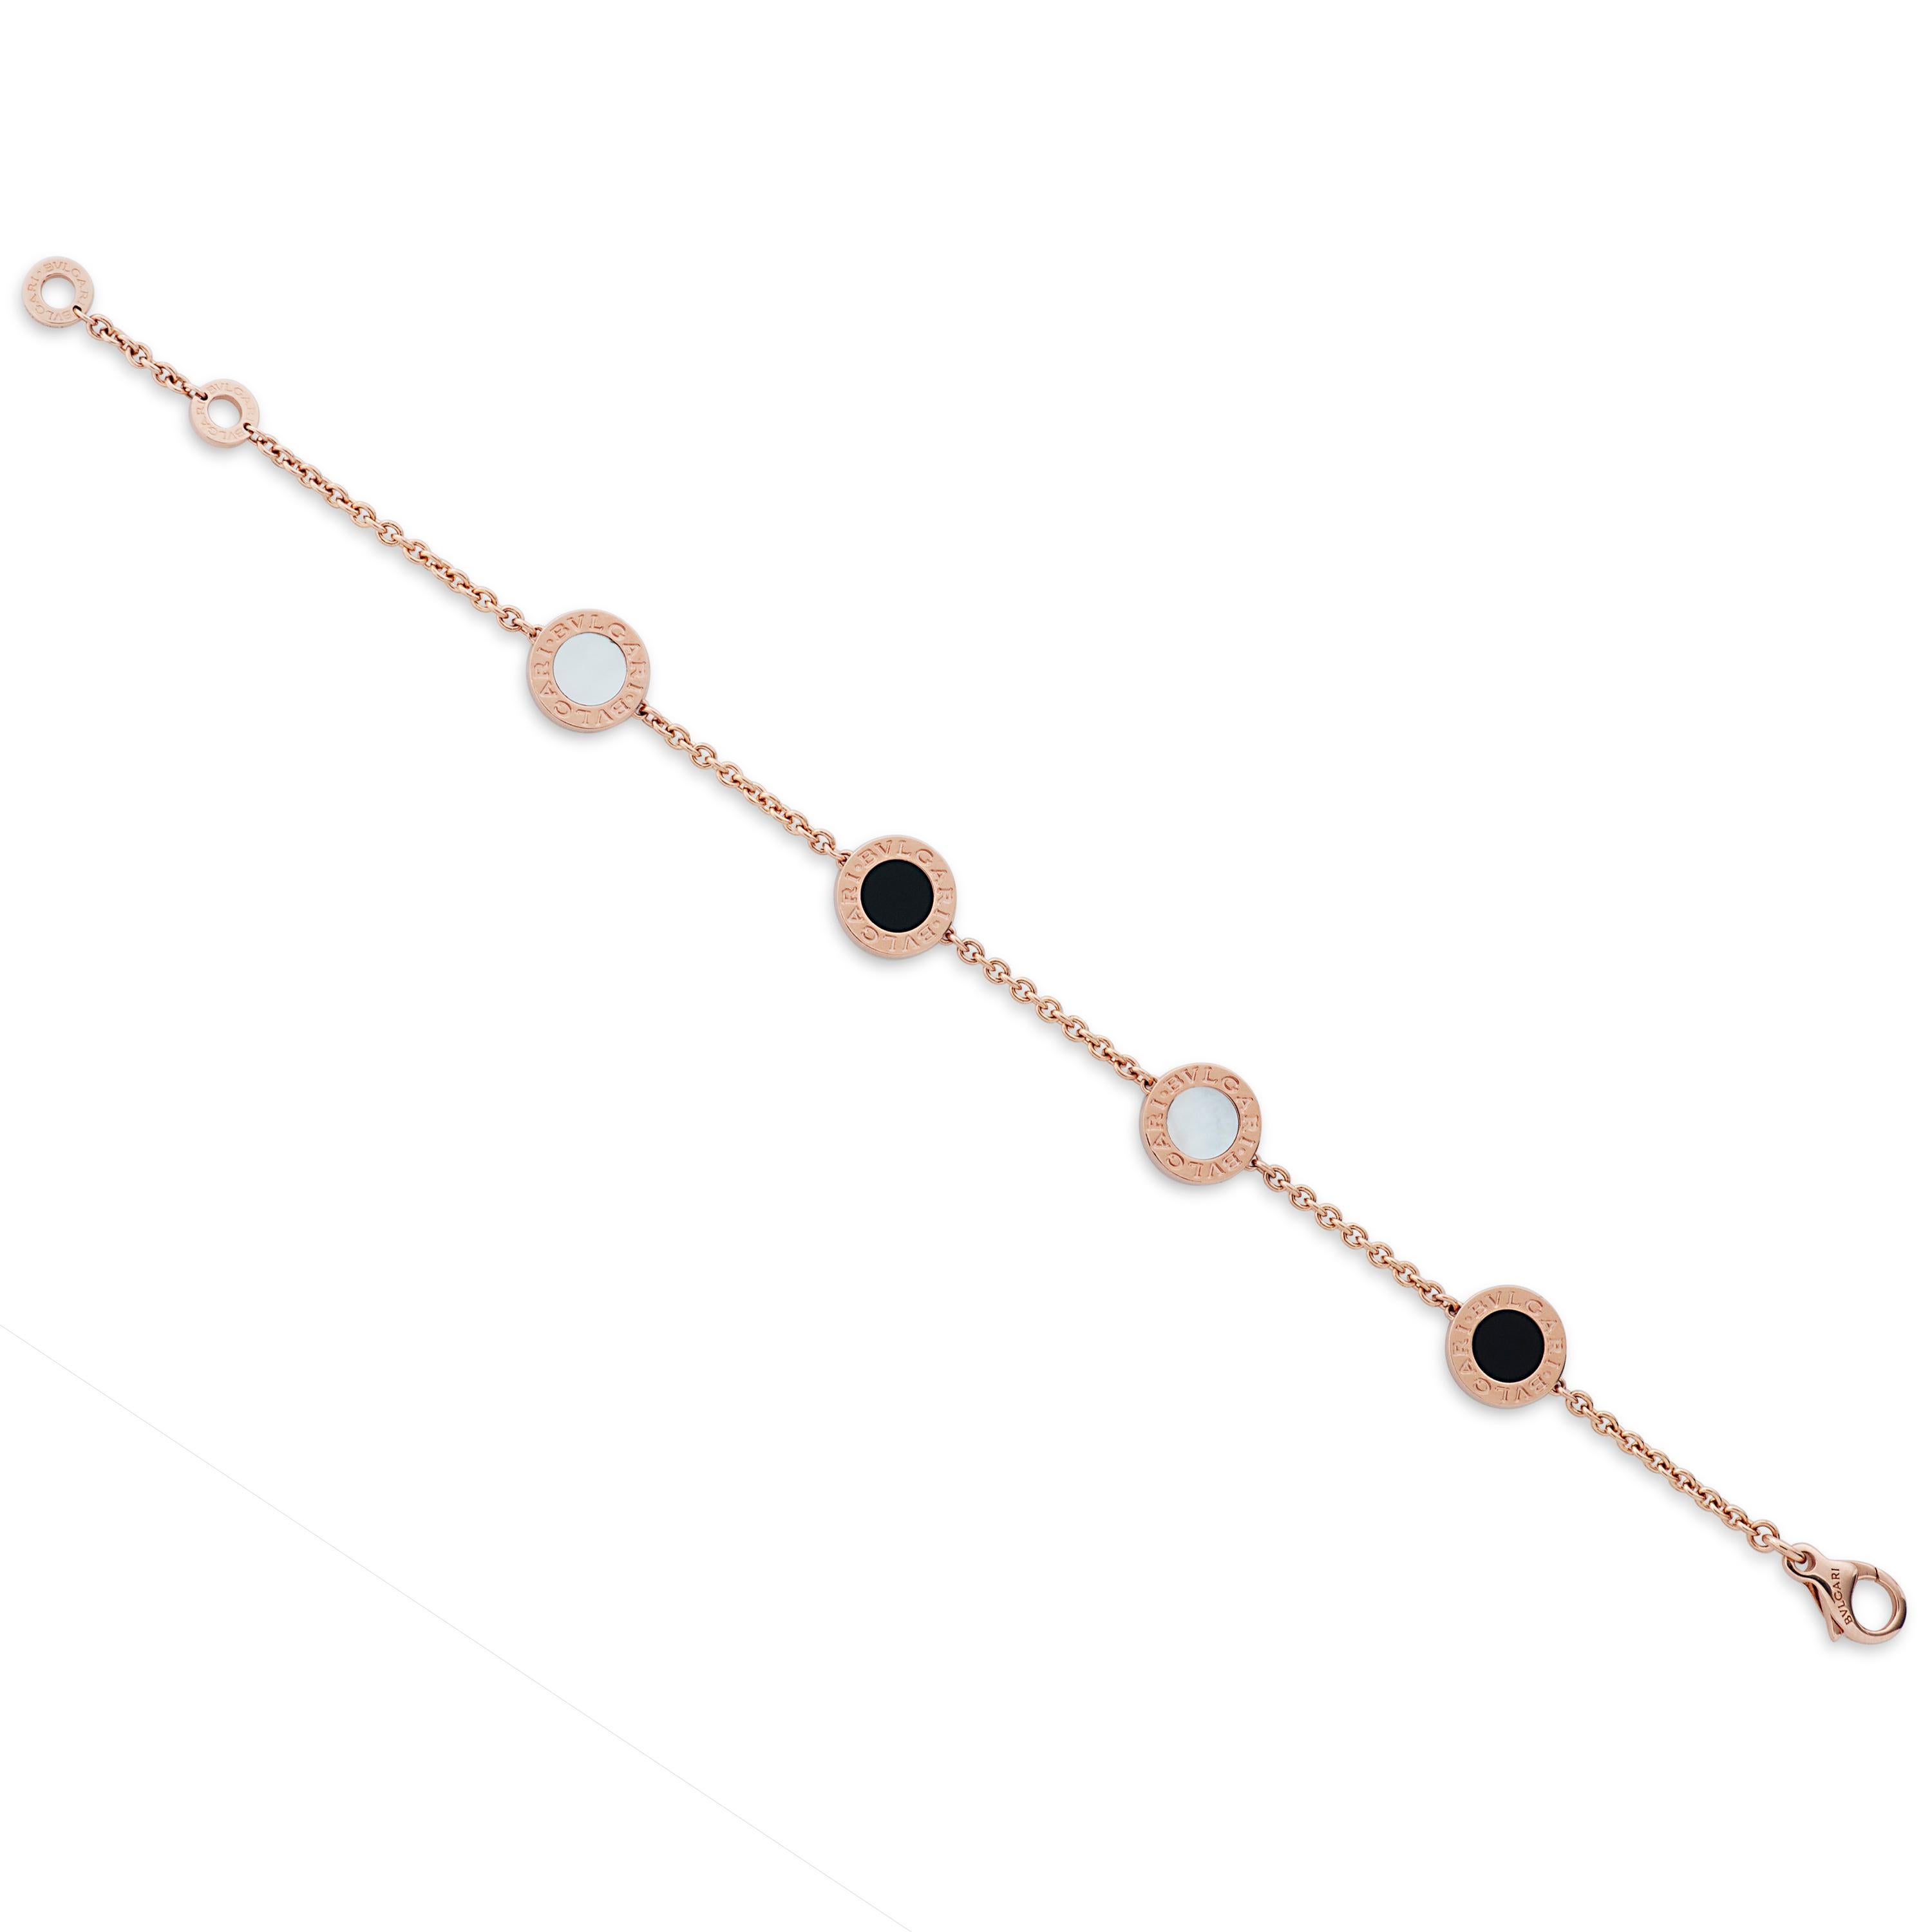 Round Cut Bvlgari Onyx and Mother of Pearl Station Bracelet in 18k Rose Gold